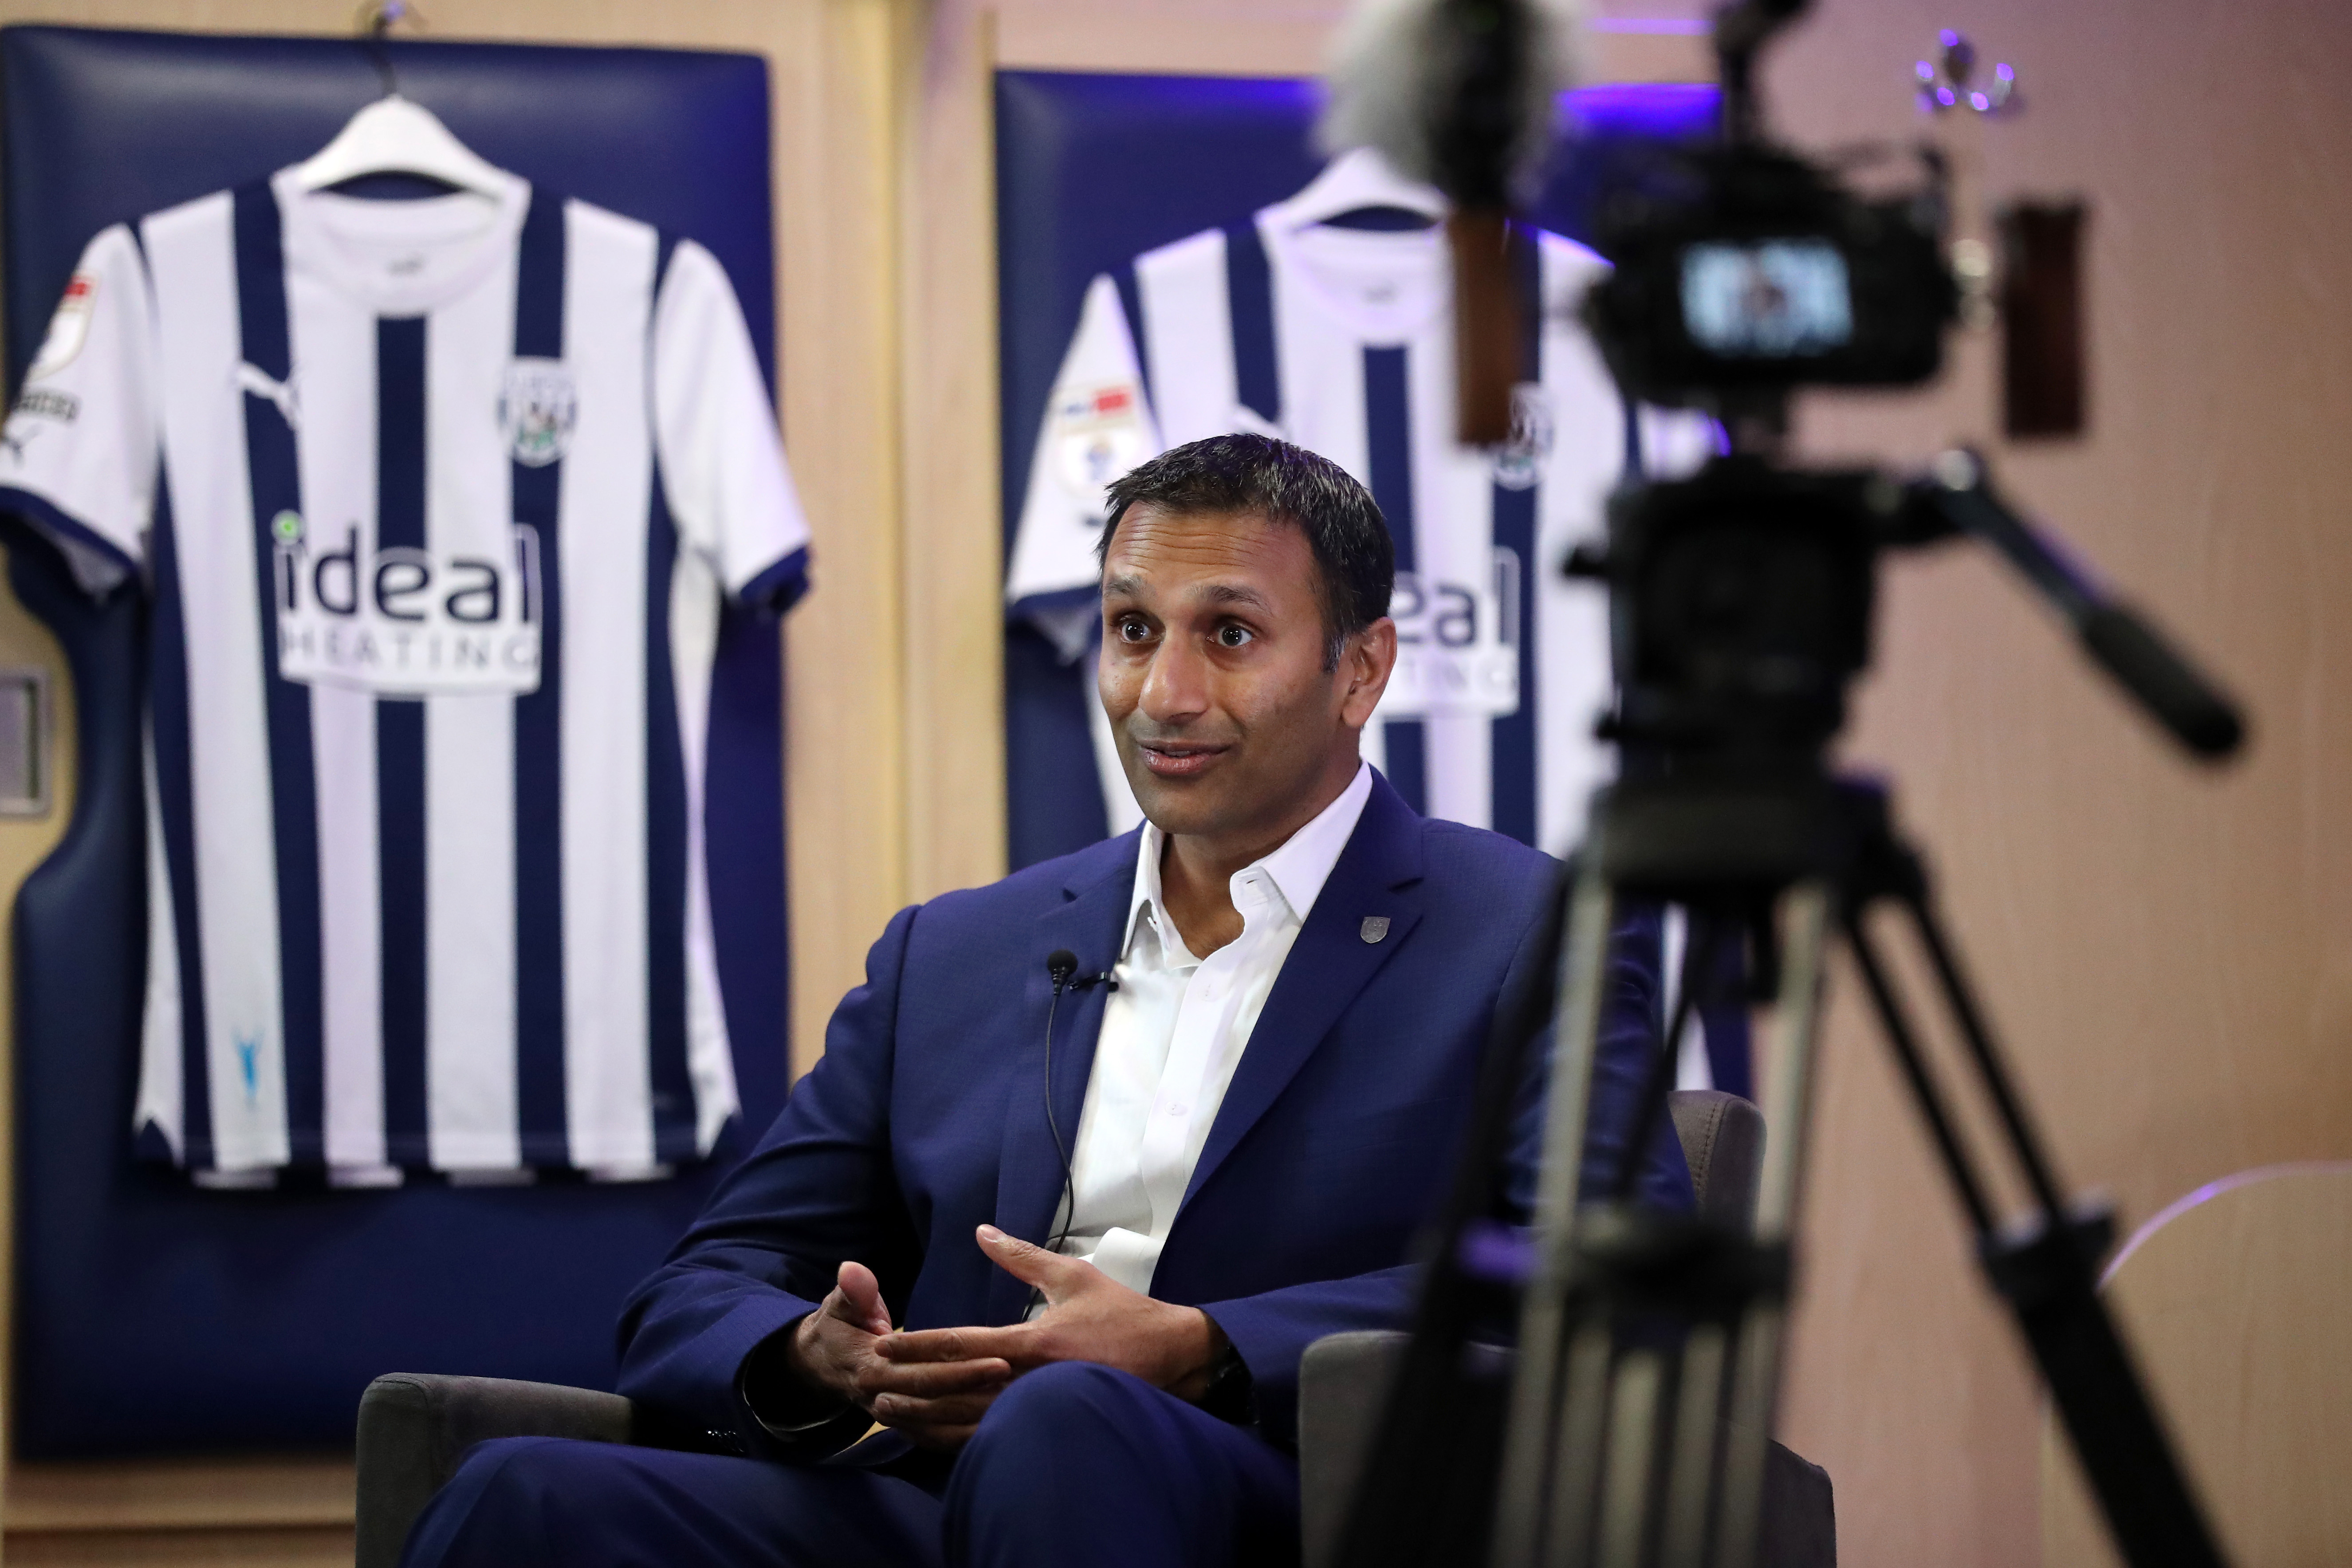 Shilen Patel is interviewed by WBA TV in the home dressing room at The Hawthorns with Albion shirts behind him and a camera to his side